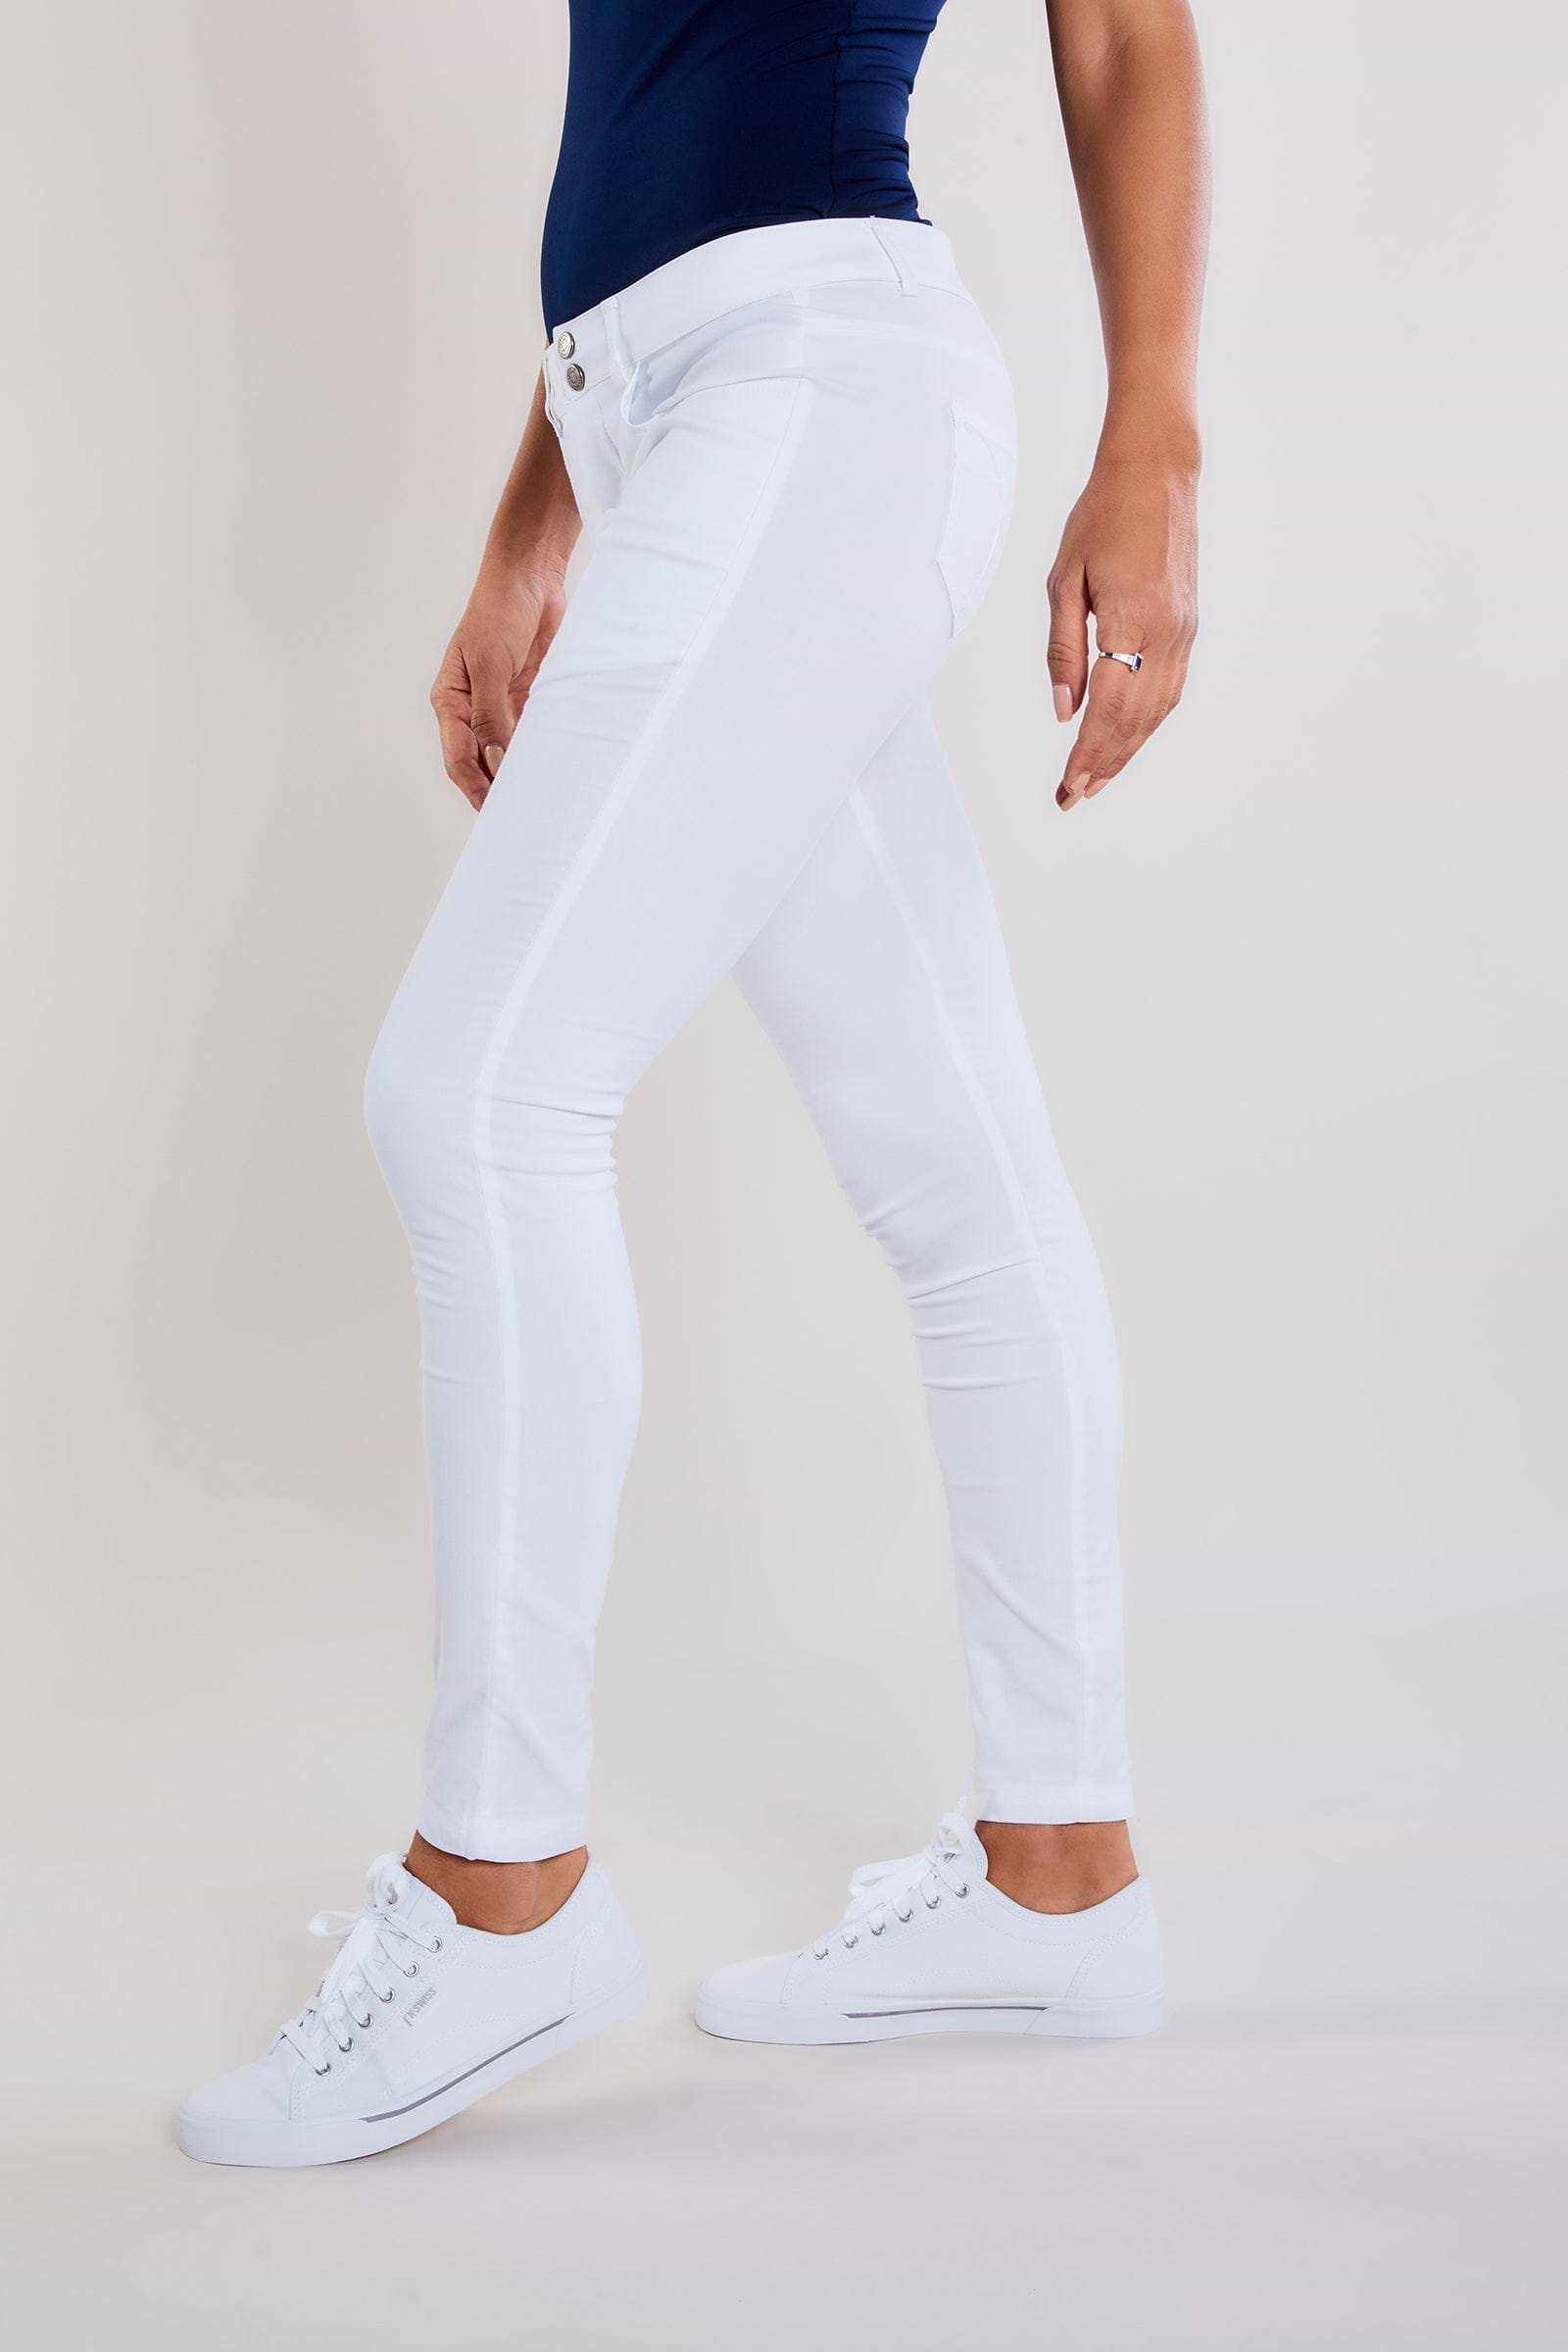 The Best Travel Pants. Side Profile of the Luisa Skinny Jean Pant in White